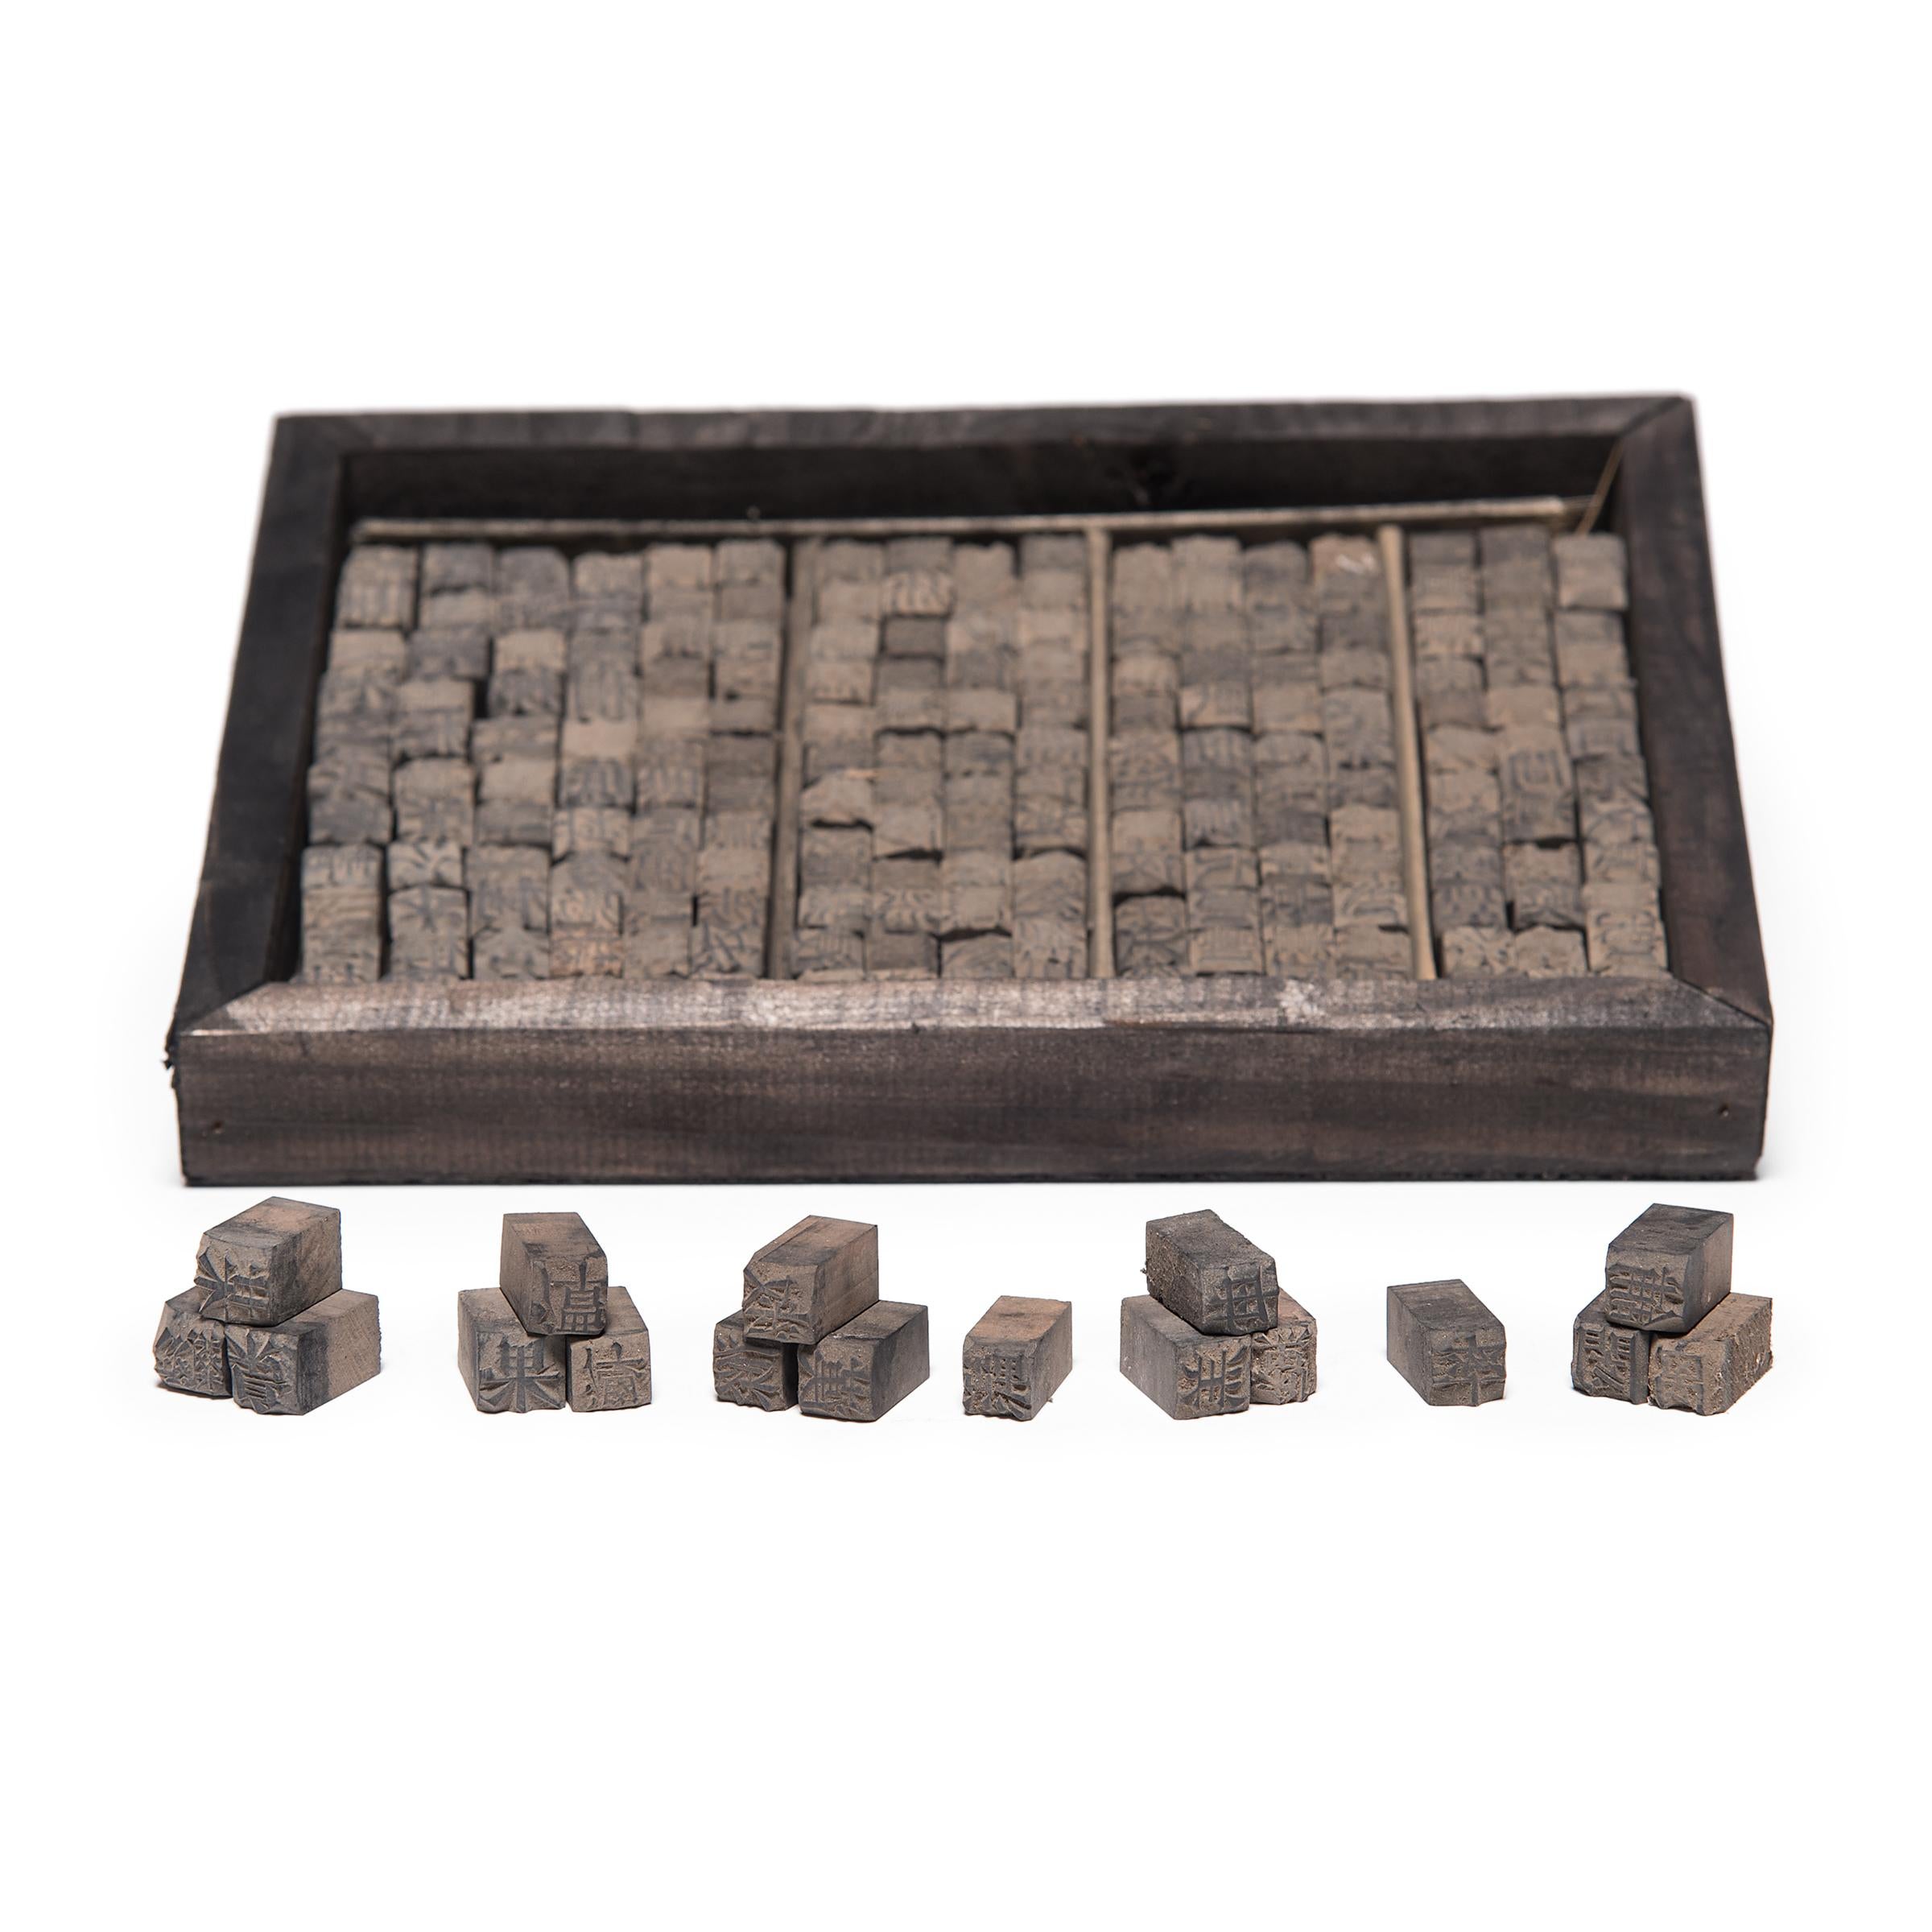 Hand-Carved Chinese Wooden Block Printing Set, circa 1900